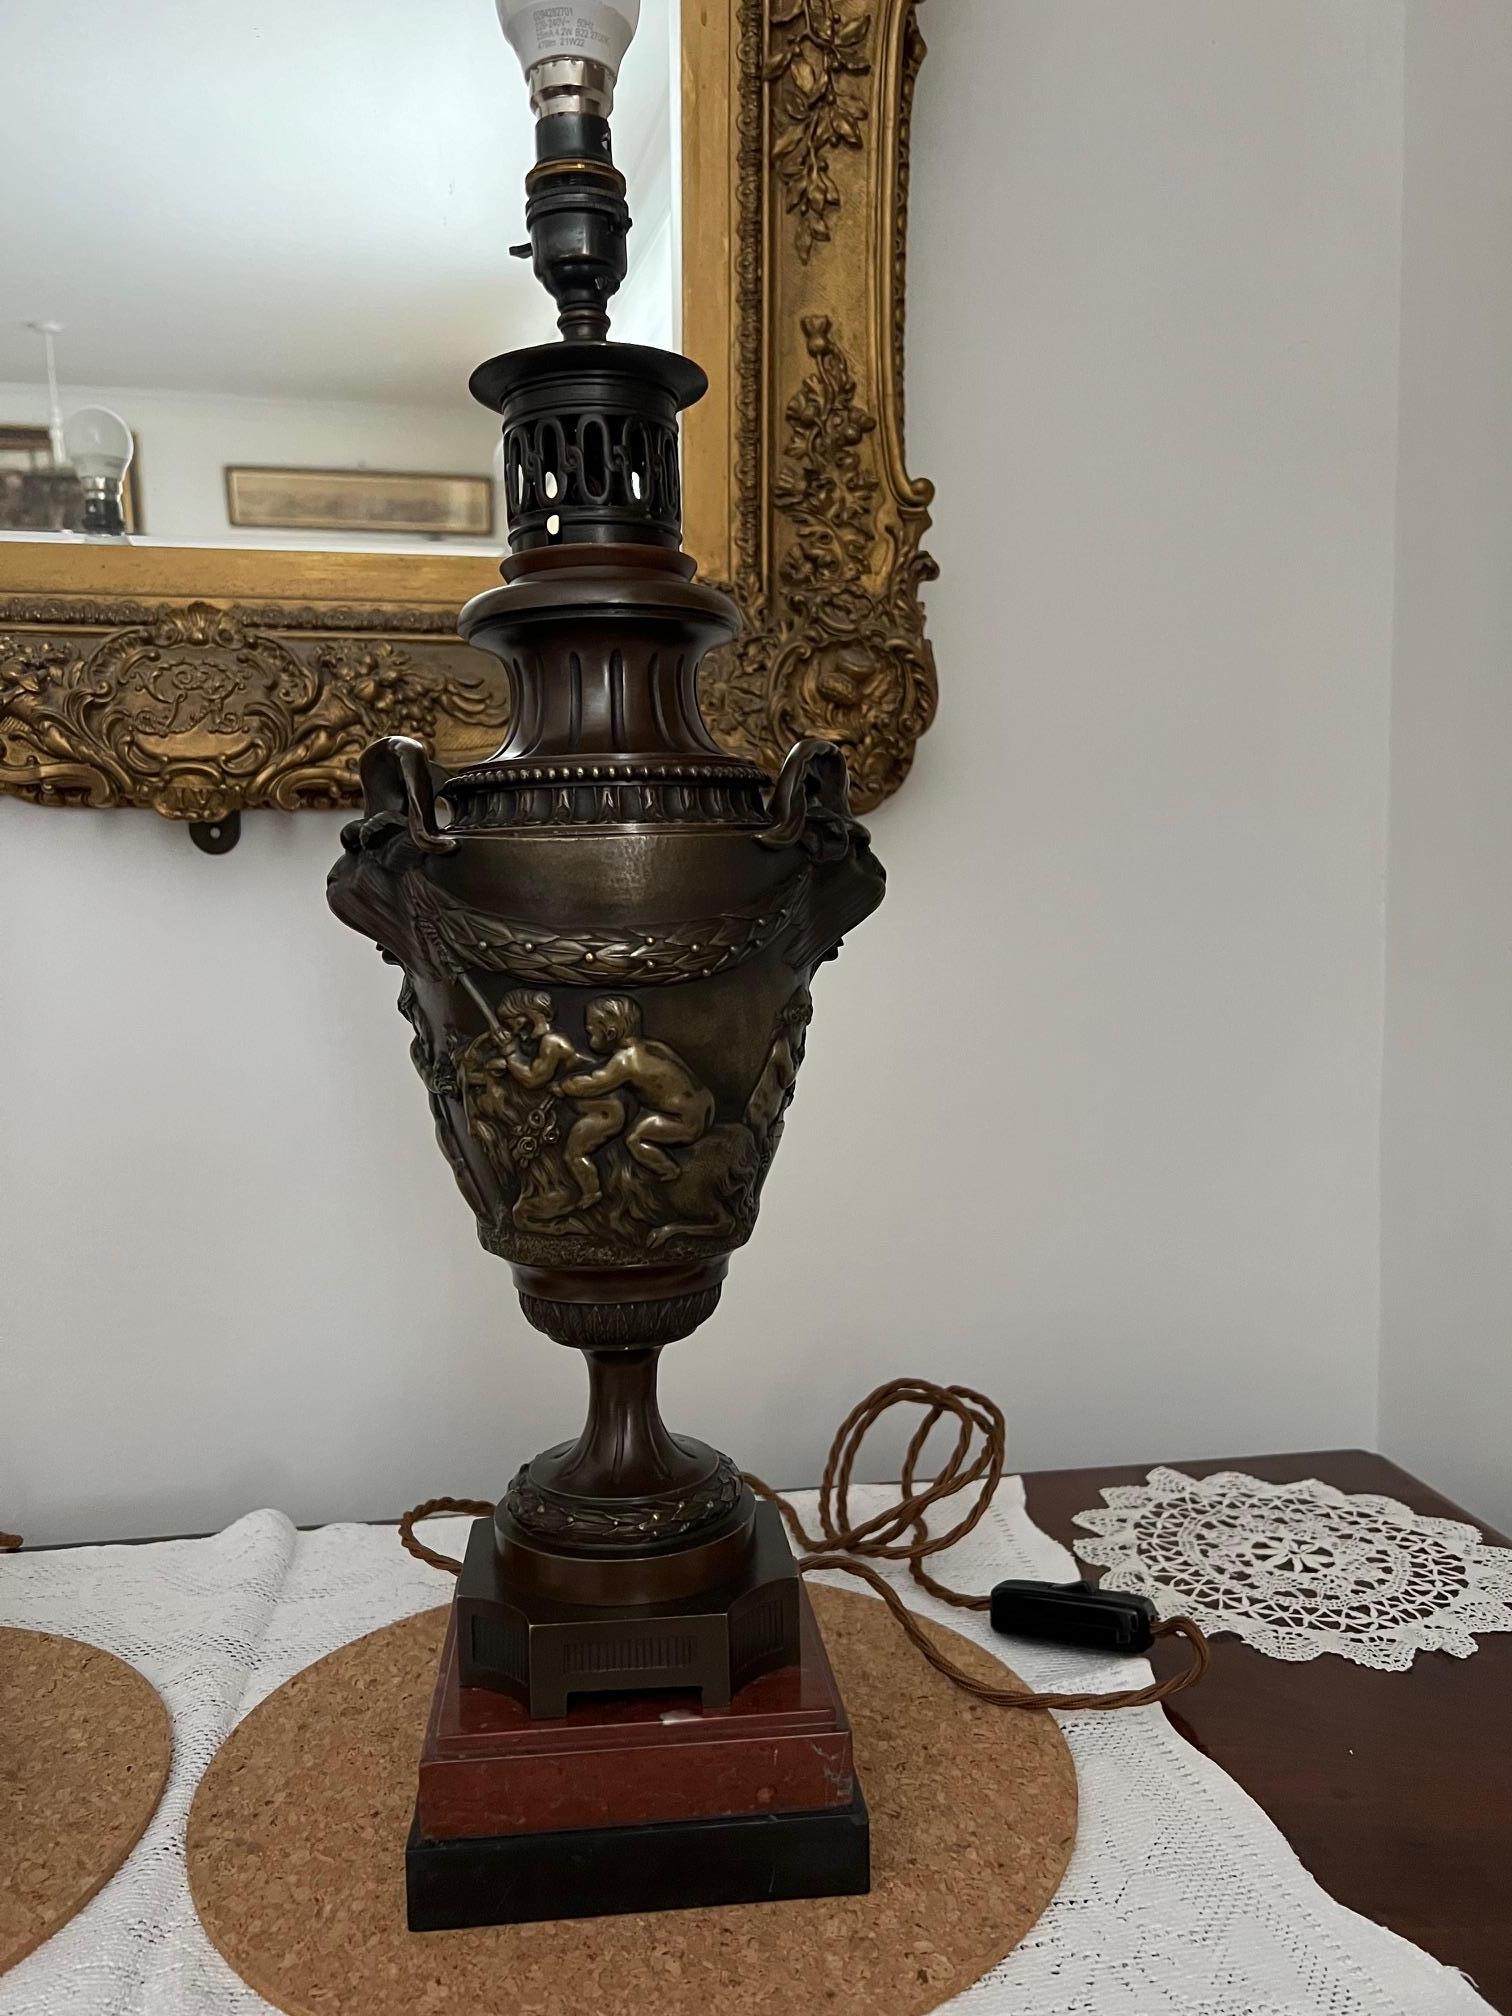 Wonderful bronze table lamps with mythical horned beast handles.

Body surrounded by cherubs cavorting and drinking, these showing some signs of polishing to surface.

Rest of lamps is a lovely nut brown patina.

Now fitted for electricity, PAT